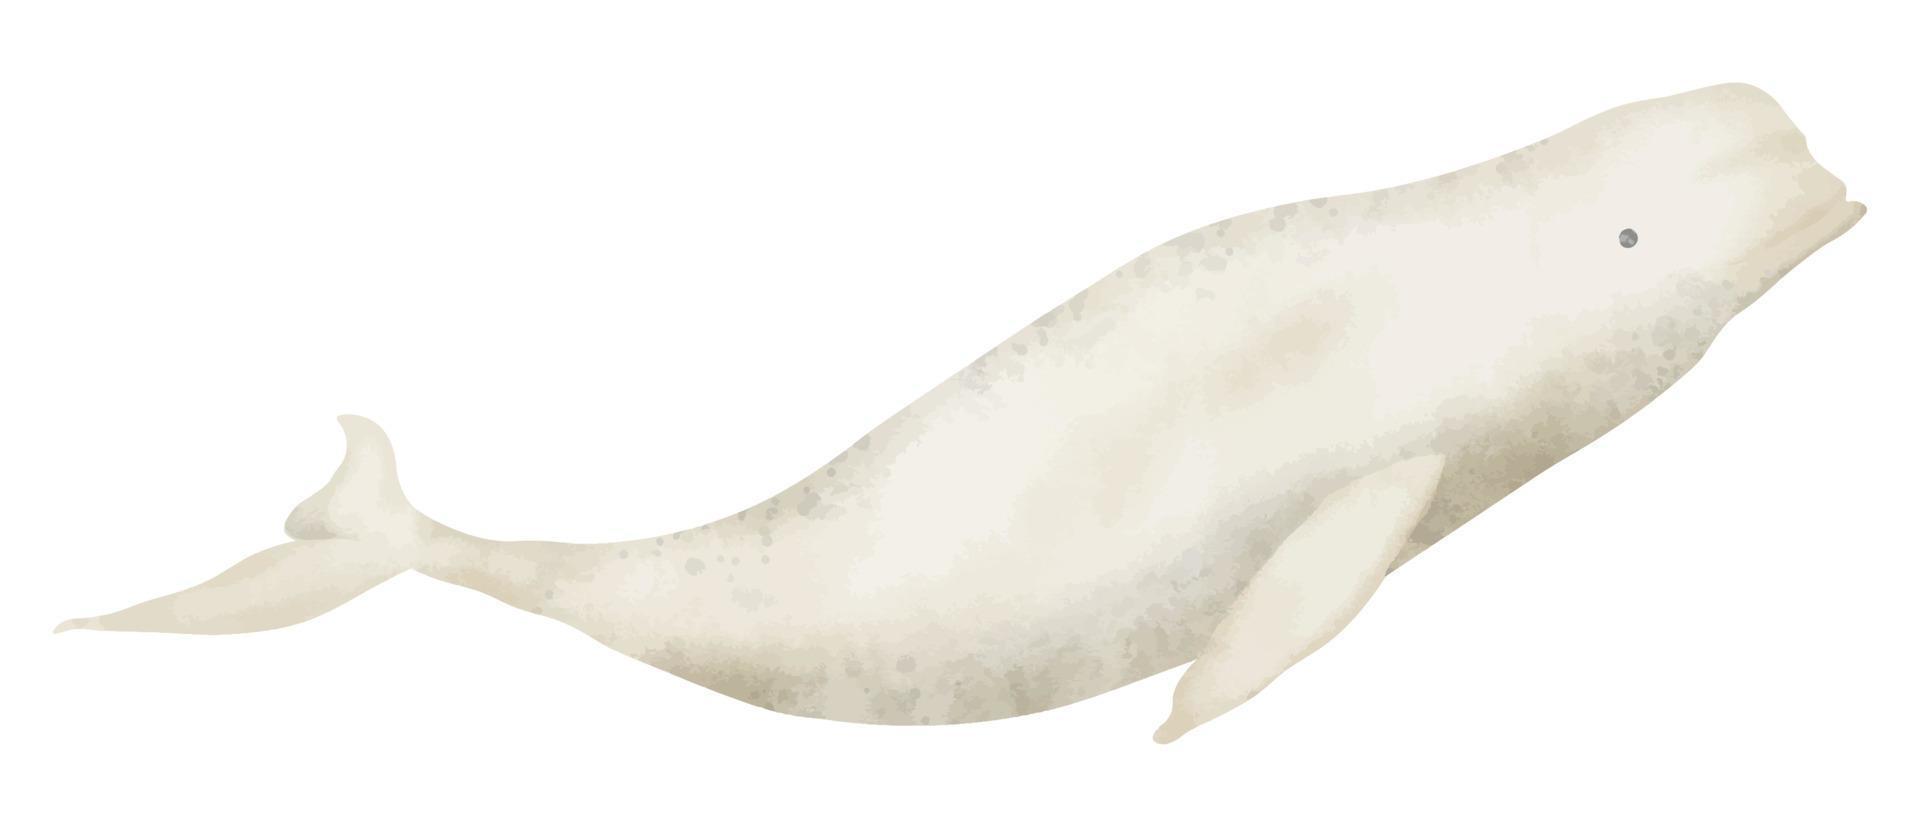 Beluga Whale watercolor realistic hand drawn illustration. North ocean animal drawing on isolated background. Hand drawn sketch of big mammal Arctic underwater fish. Polar Delphinapterus leucas vector